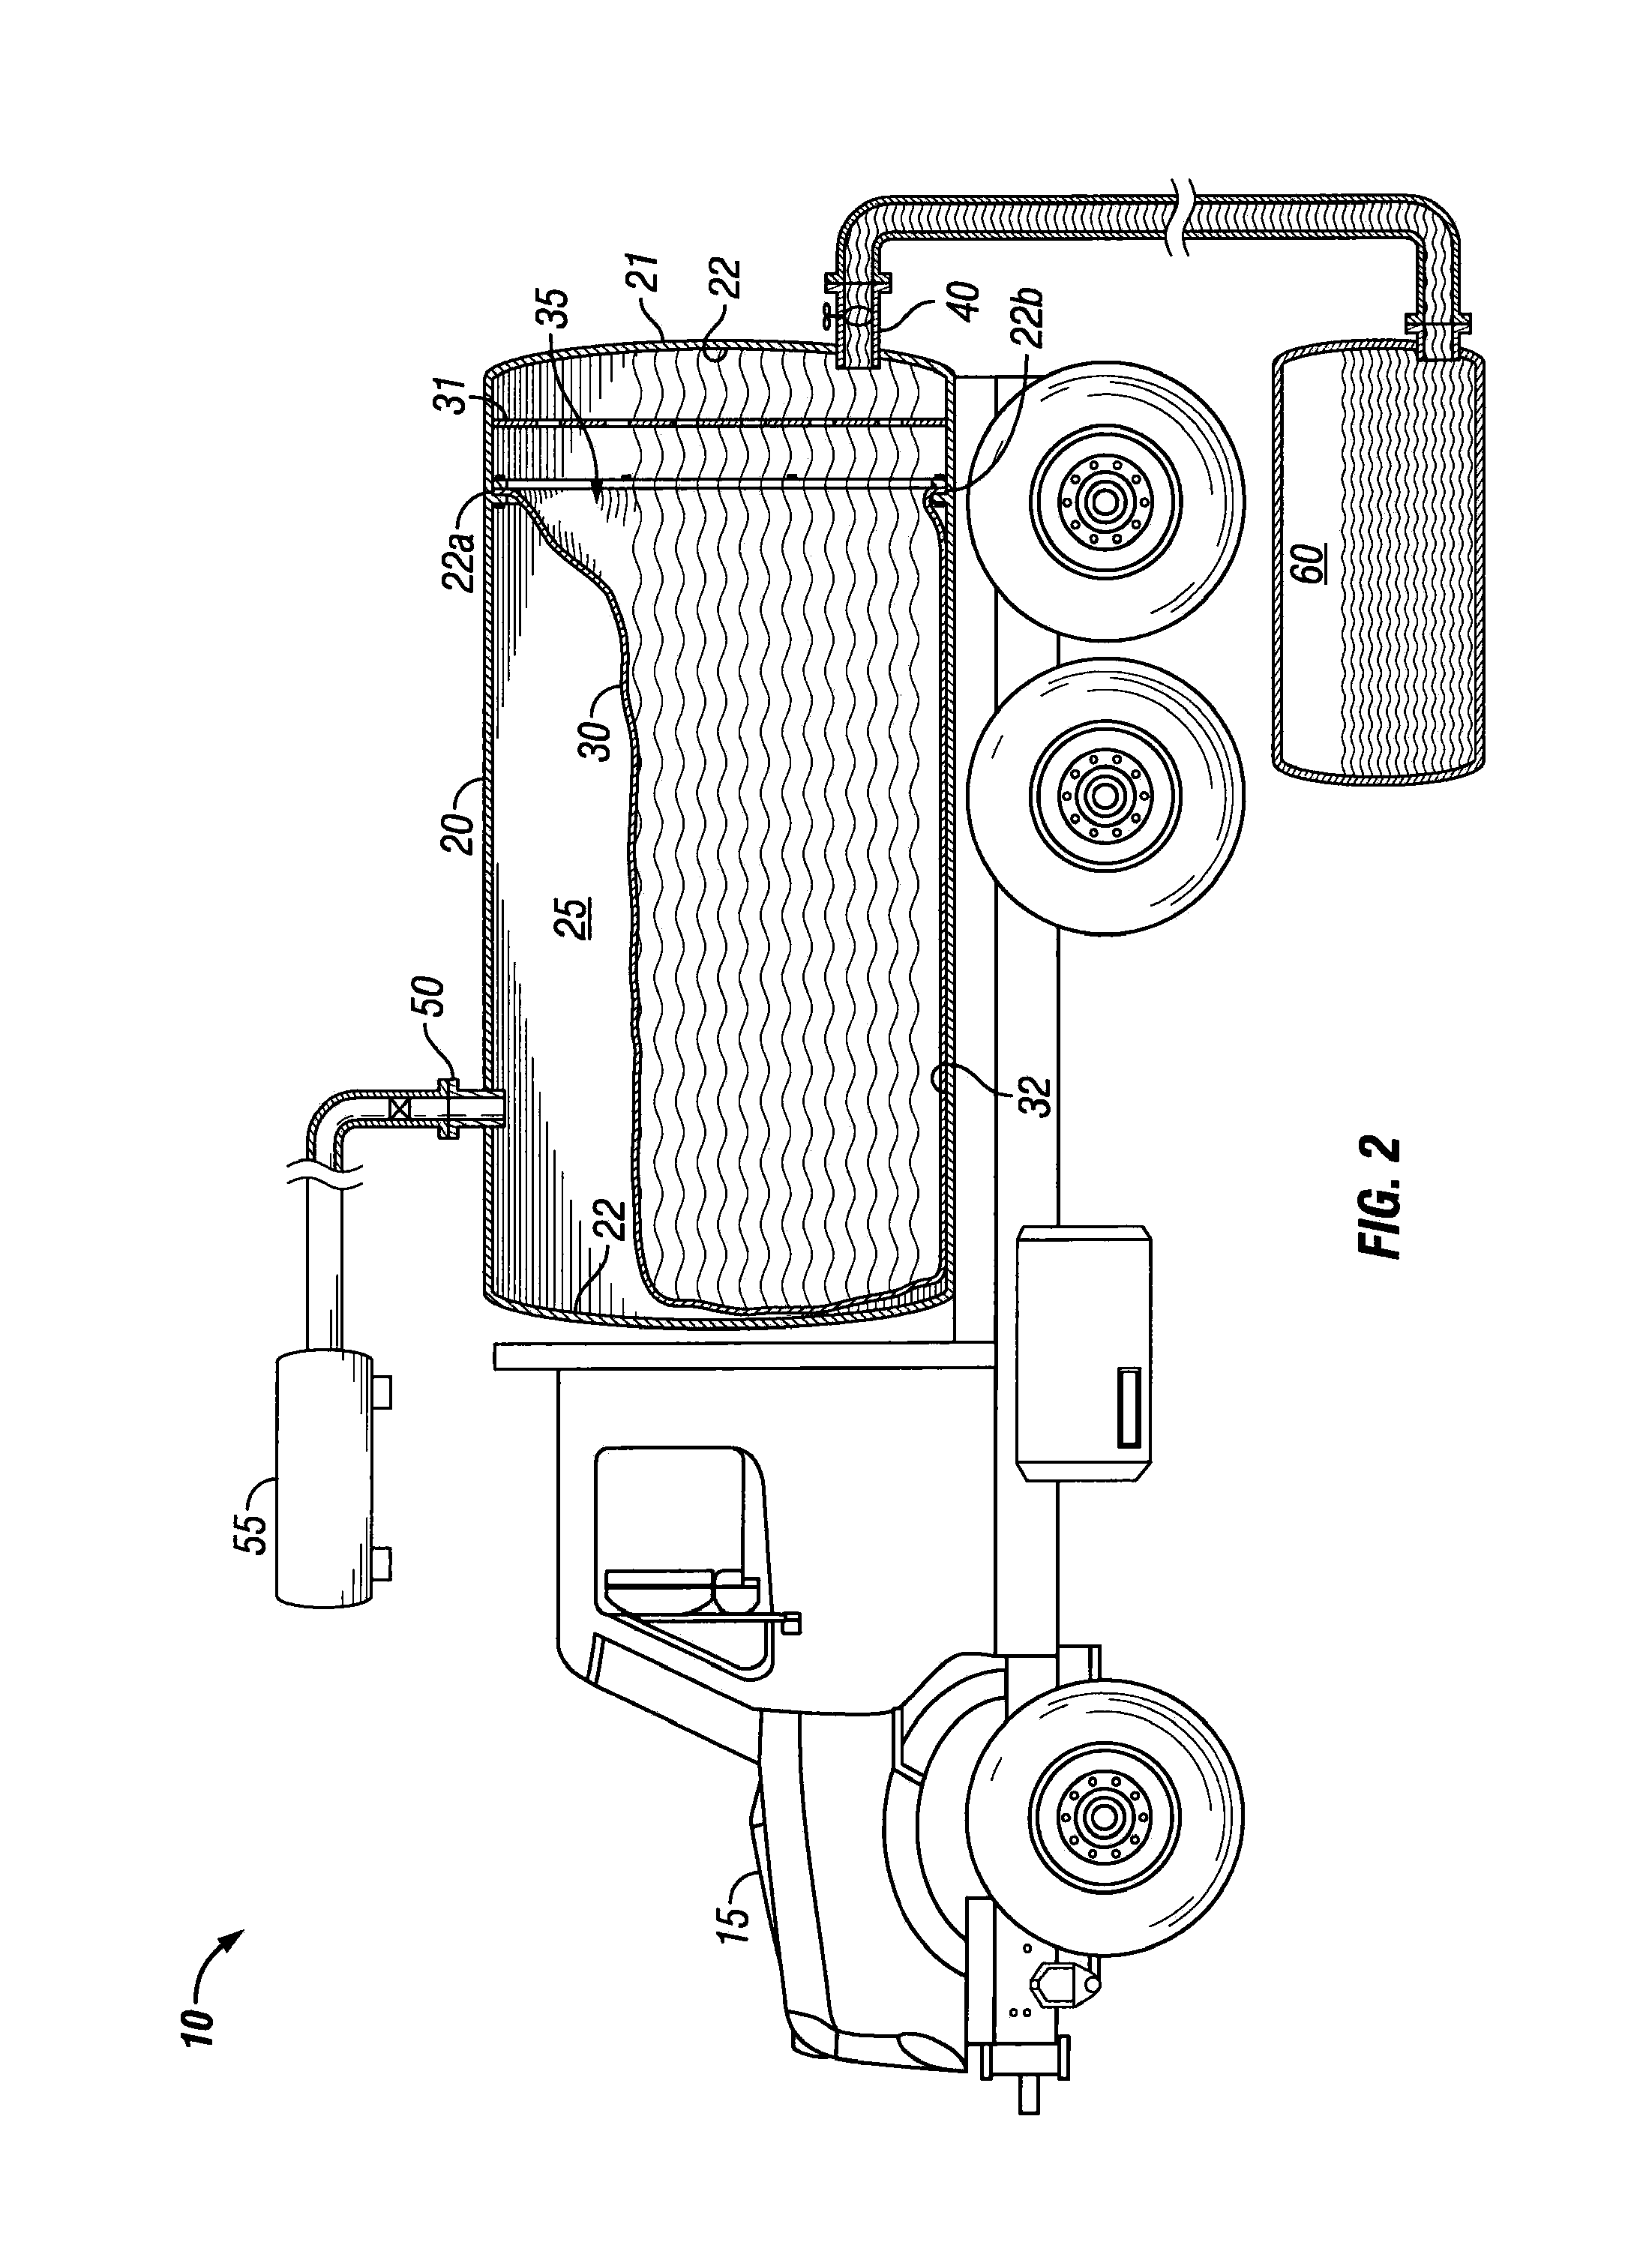 Bladder and engagement device for storage tank